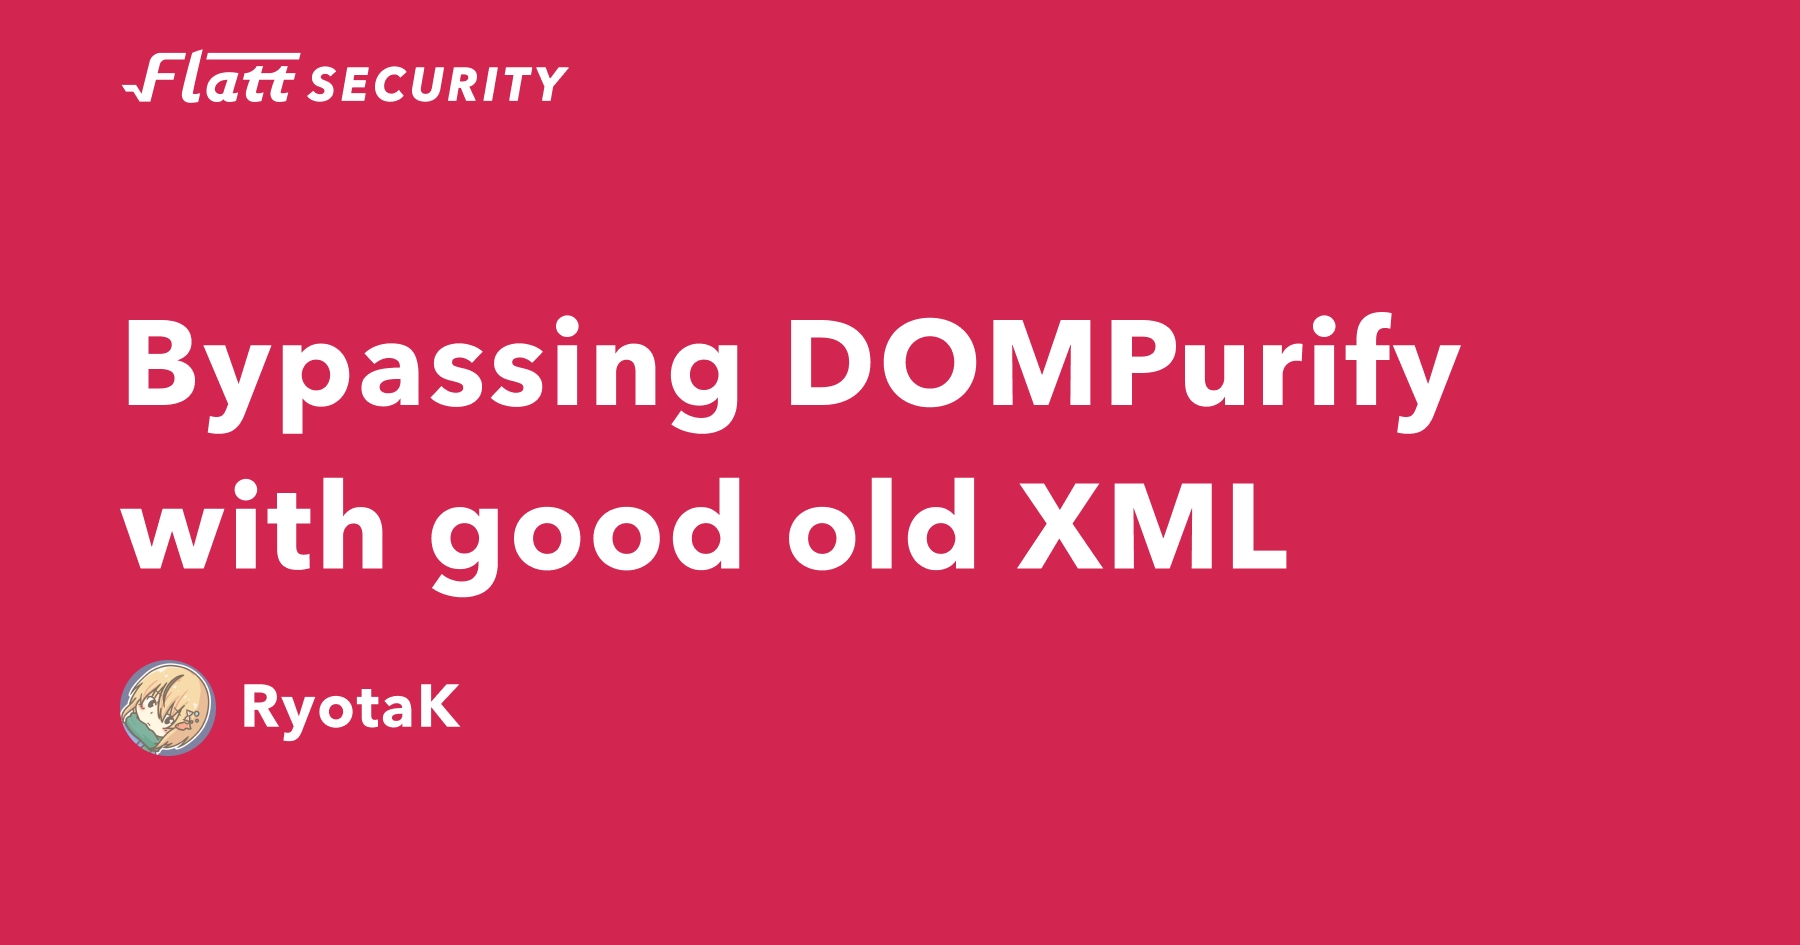 Bypassing DOMPurify with good old XML